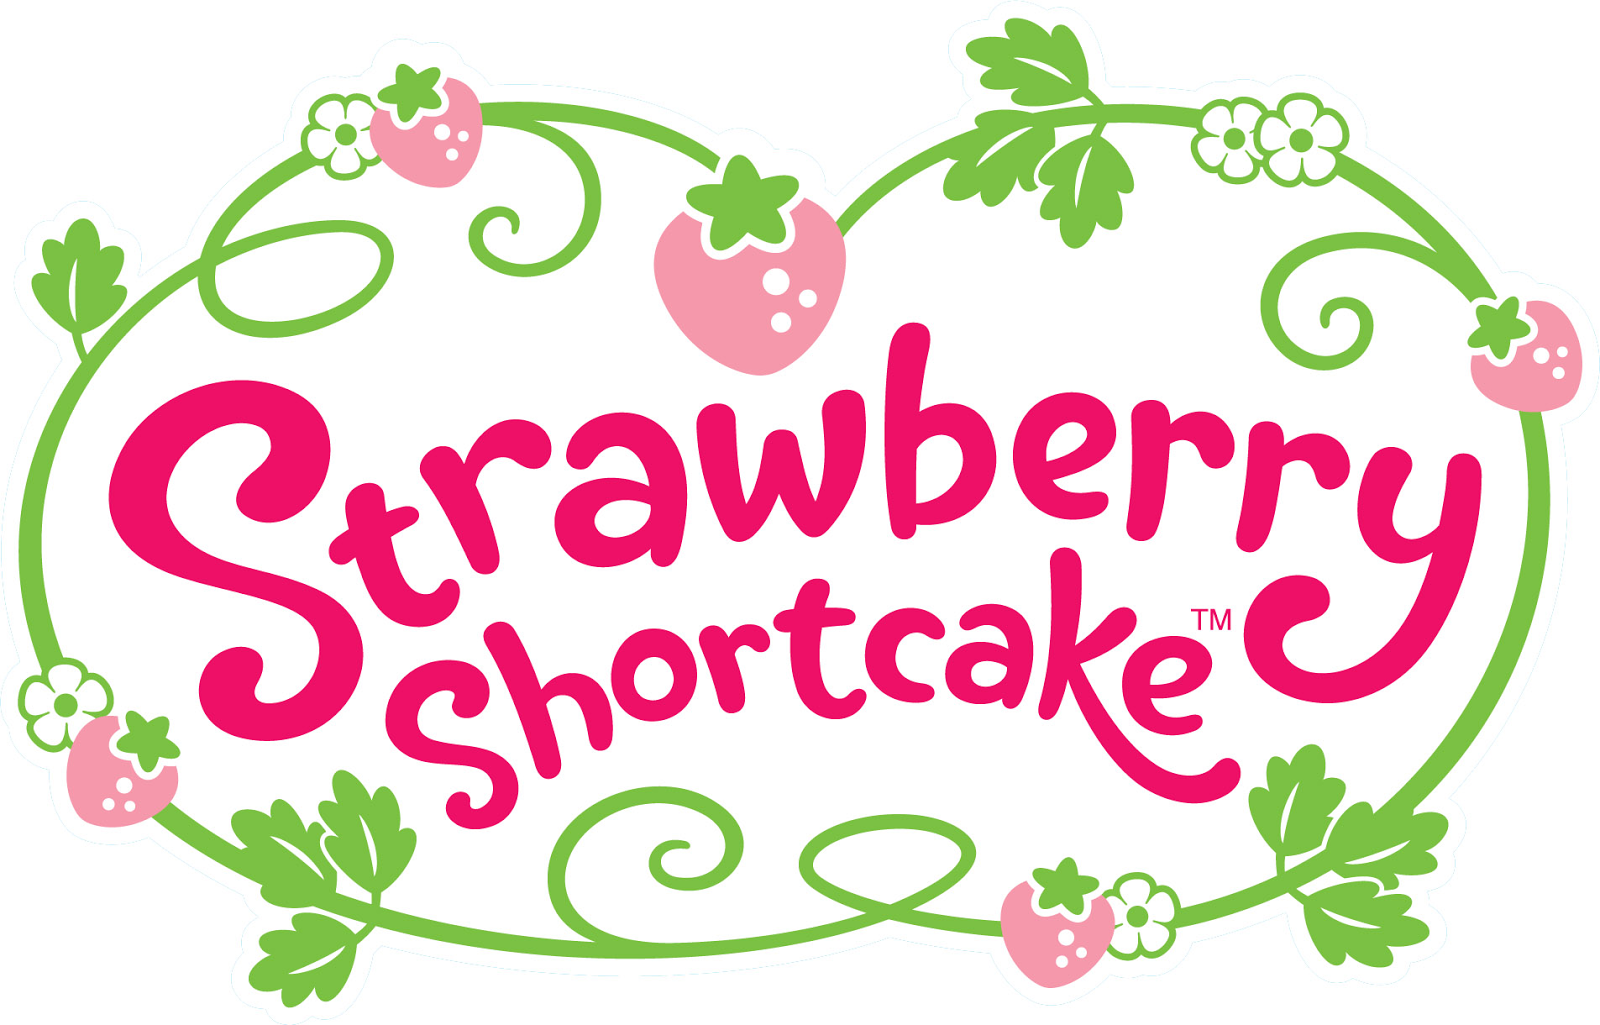 Wallpapers For Baby Strawberry Shortcake Wallpaper - Strawberry Shortcake Logo - HD Wallpaper 